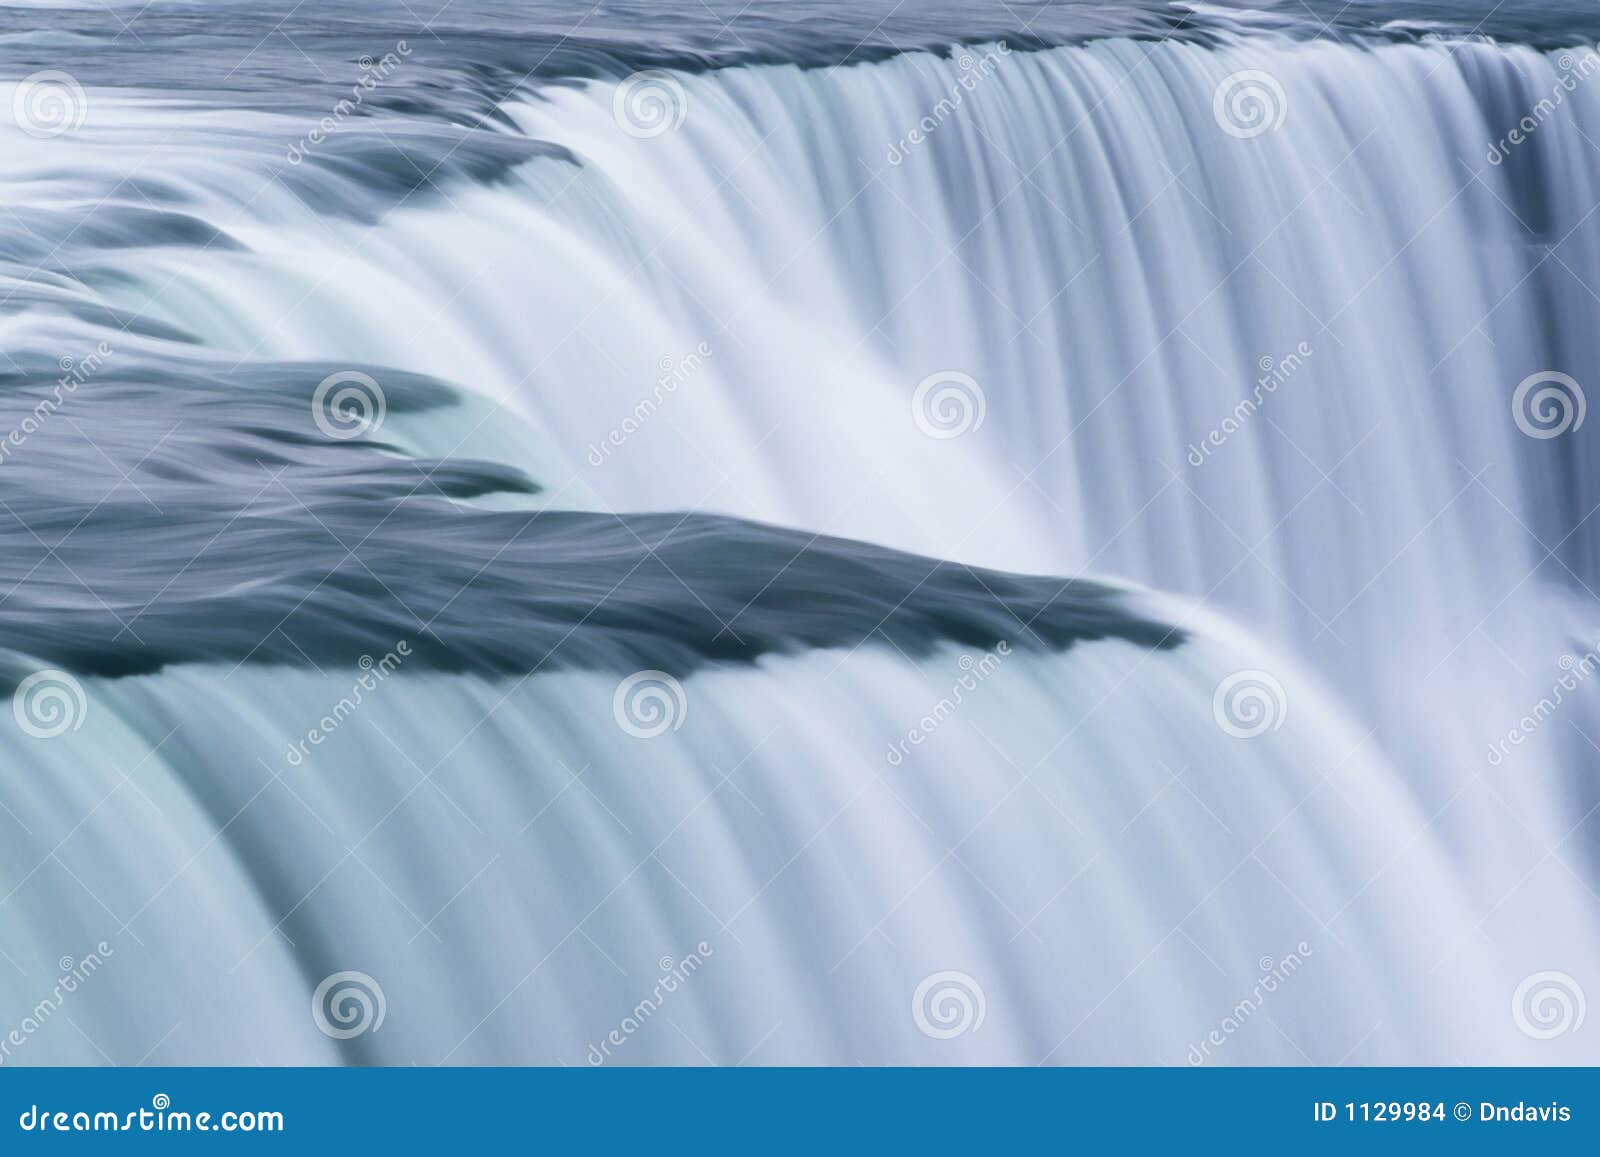 niagara falls is the largest transcountry waterfalls in the world